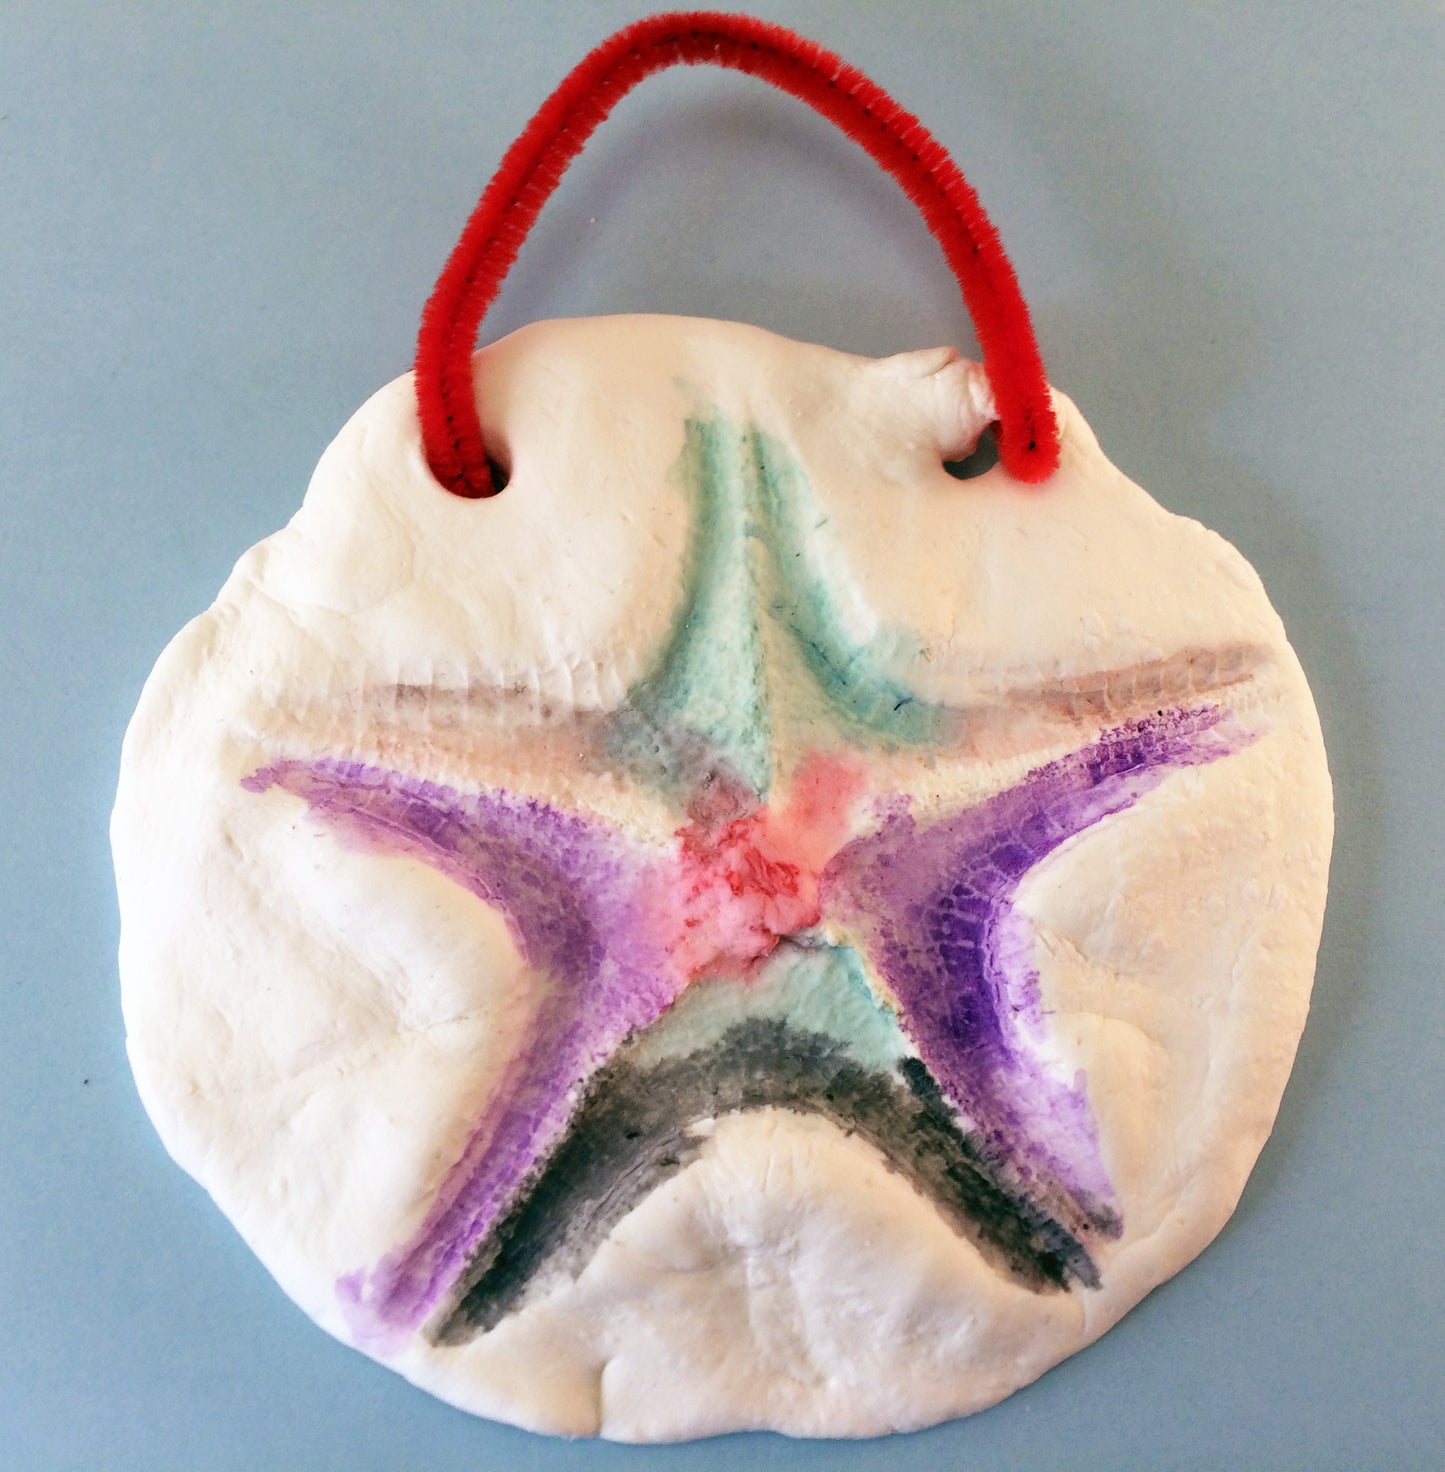 Science and art activity inspired by the book Over in an Ocean in a Coral Reef. Turn your clay imprint of a starfish into a keepsake.